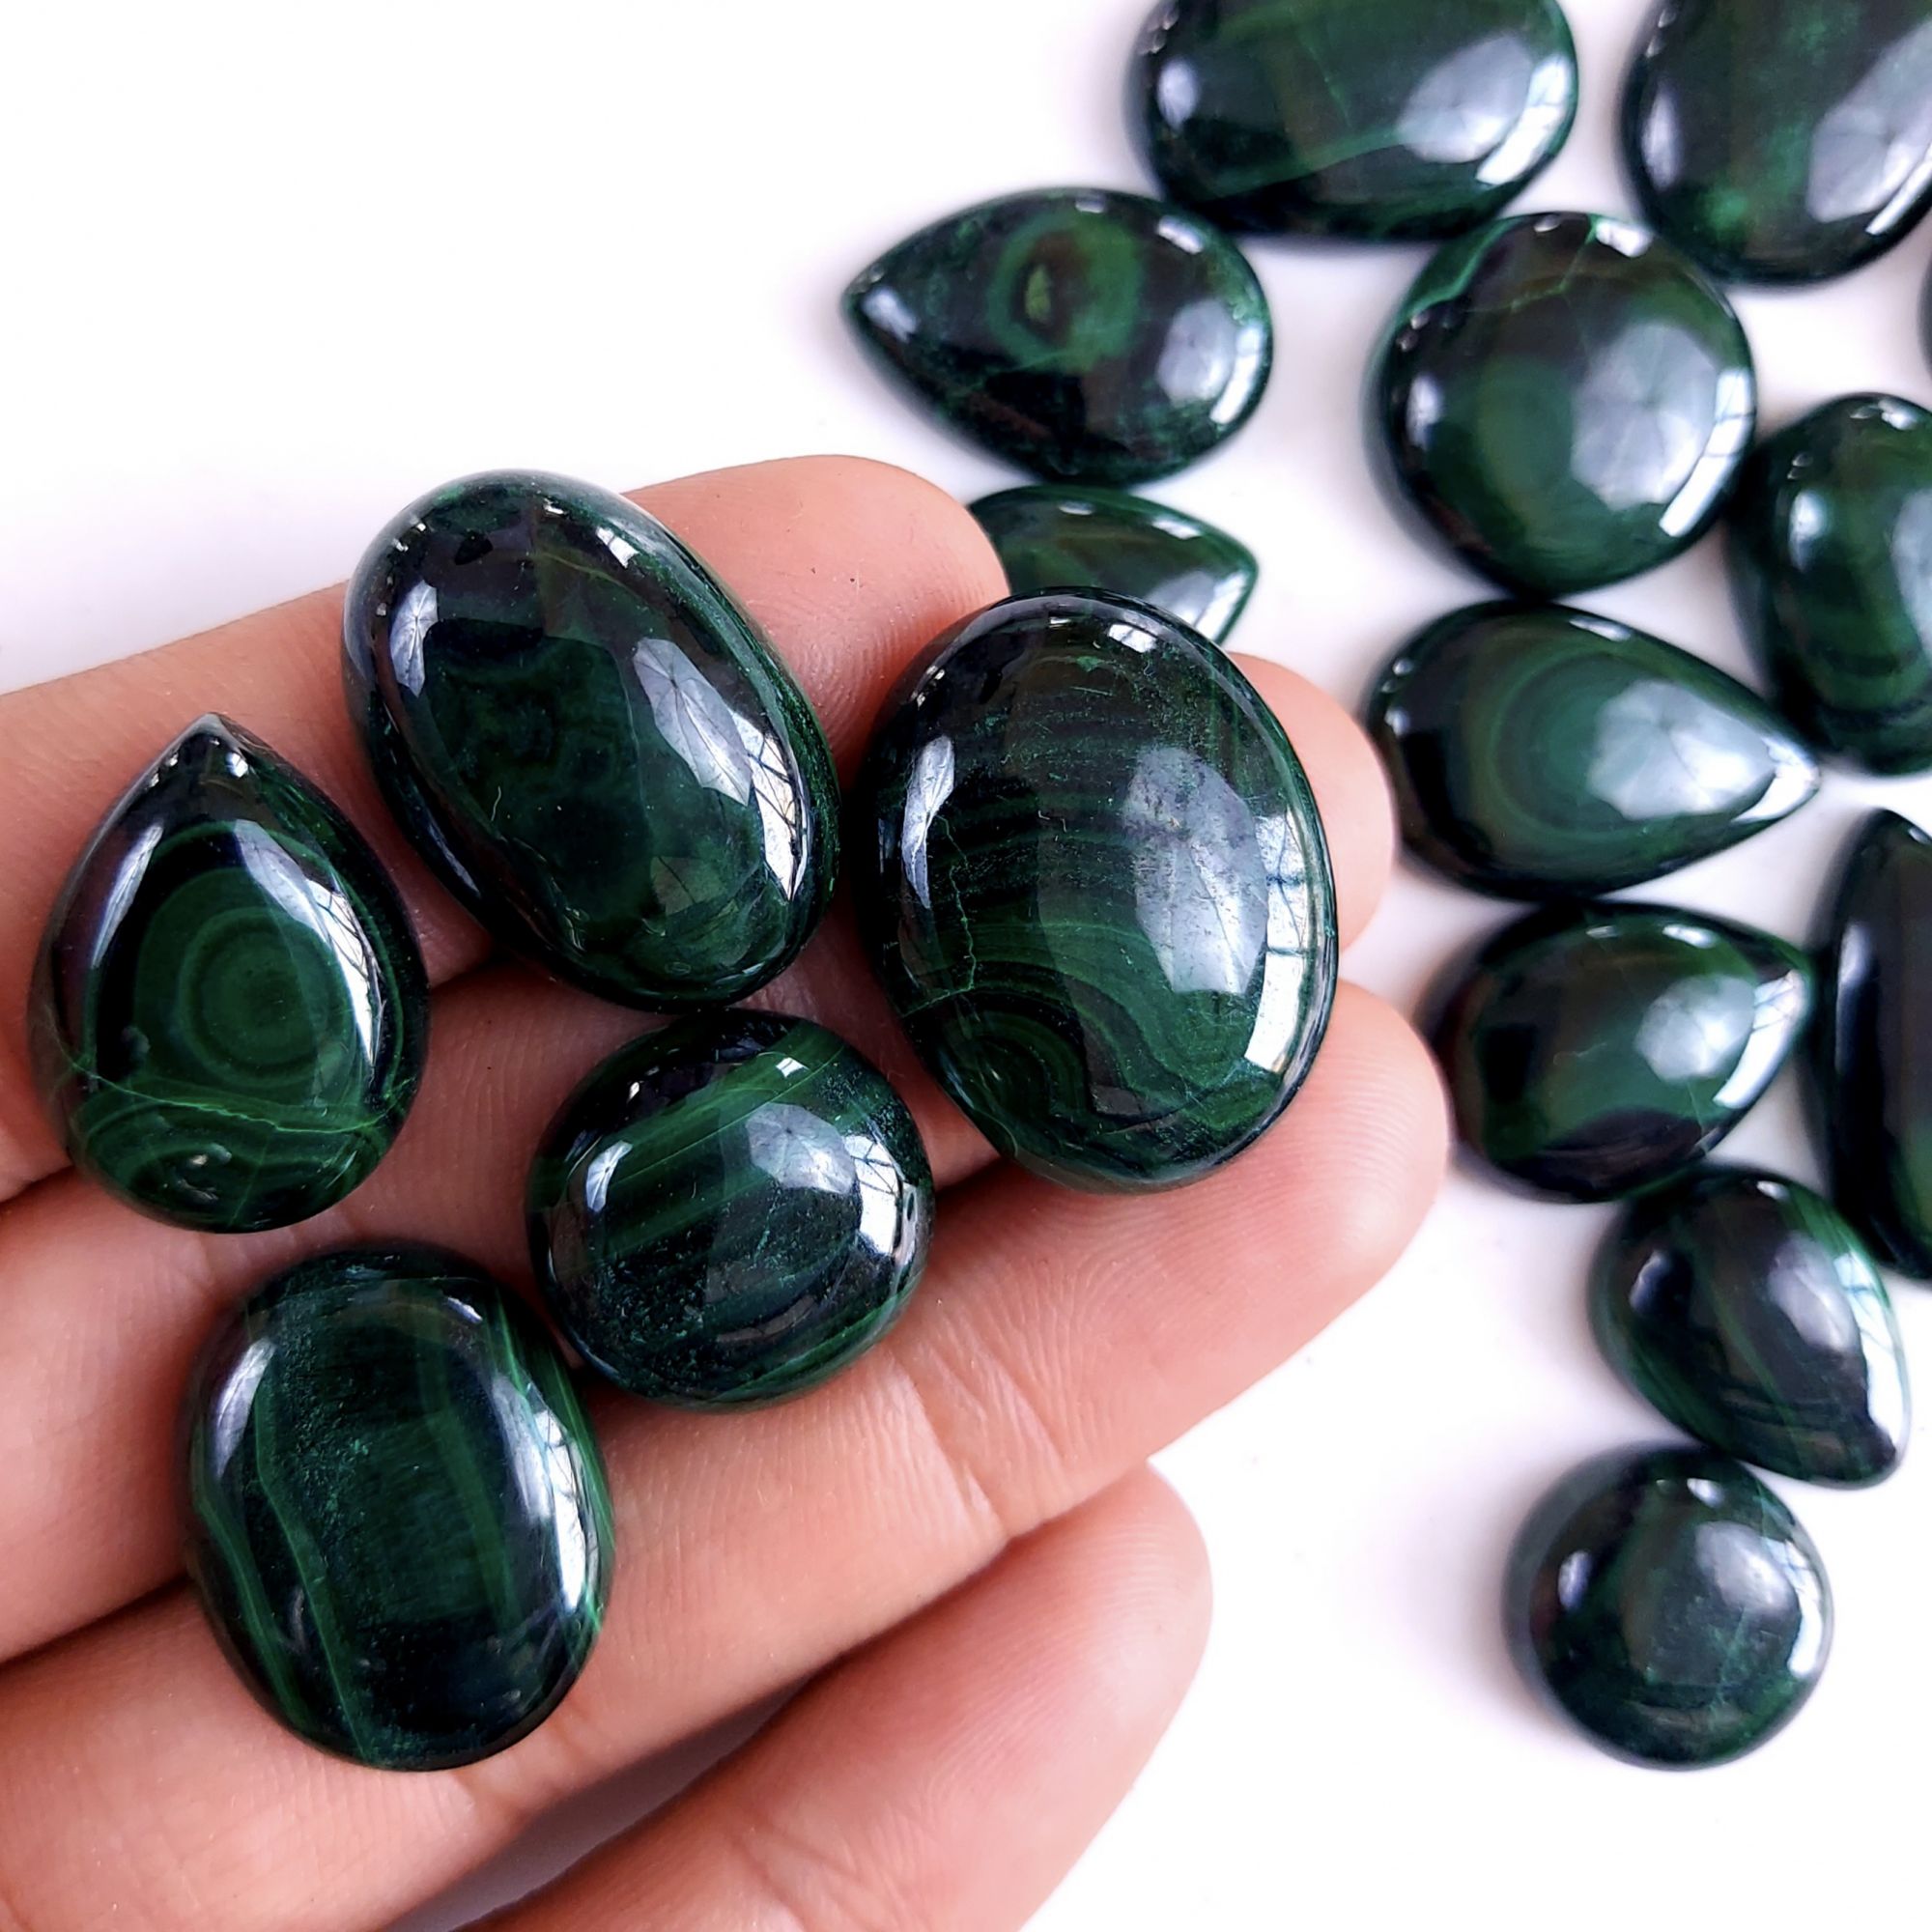 21Pcs 455Cts Natural Green Malachite Flat Back Loose Cabochon Gemstone For Handmade Jewelry Making and Craft Supplies 22x17 15x9mm#9331